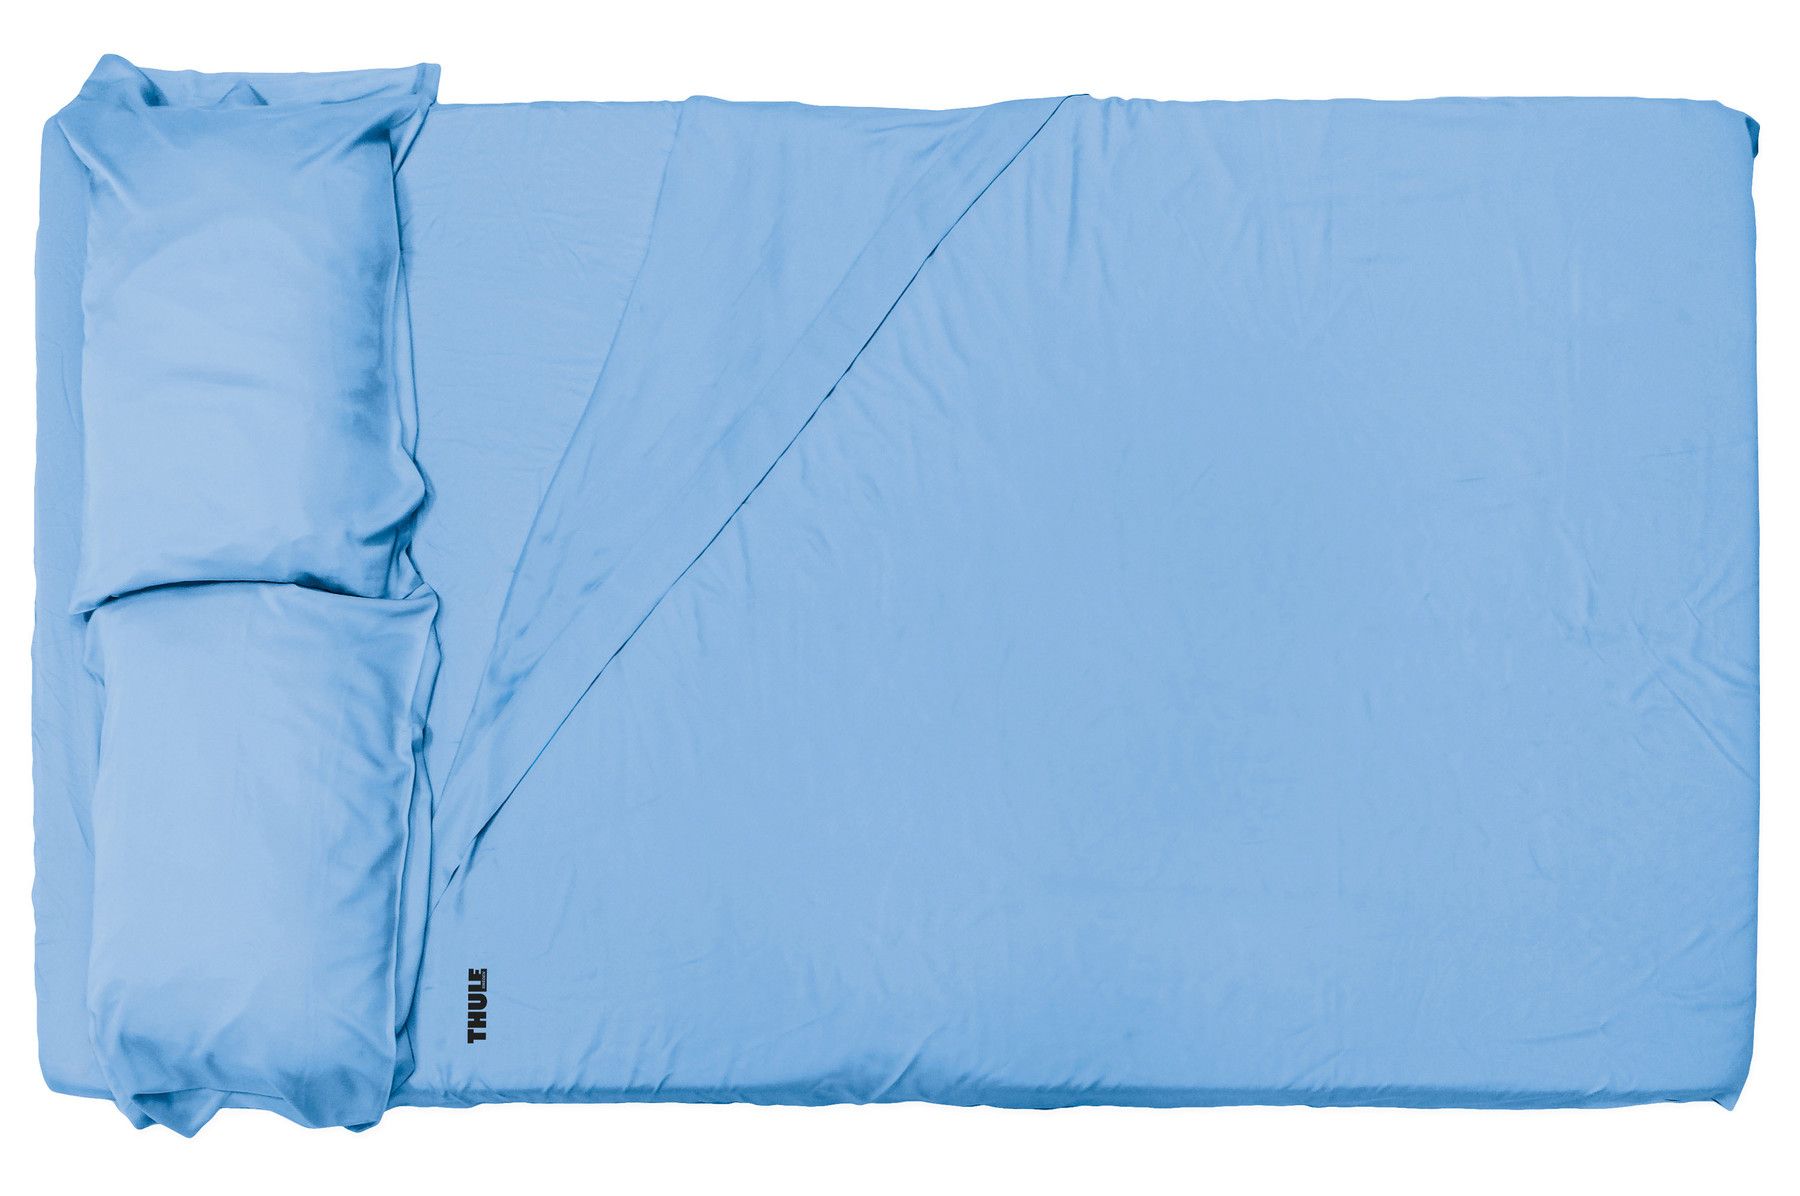 Thule 4-person sheets bedding blue - 901802